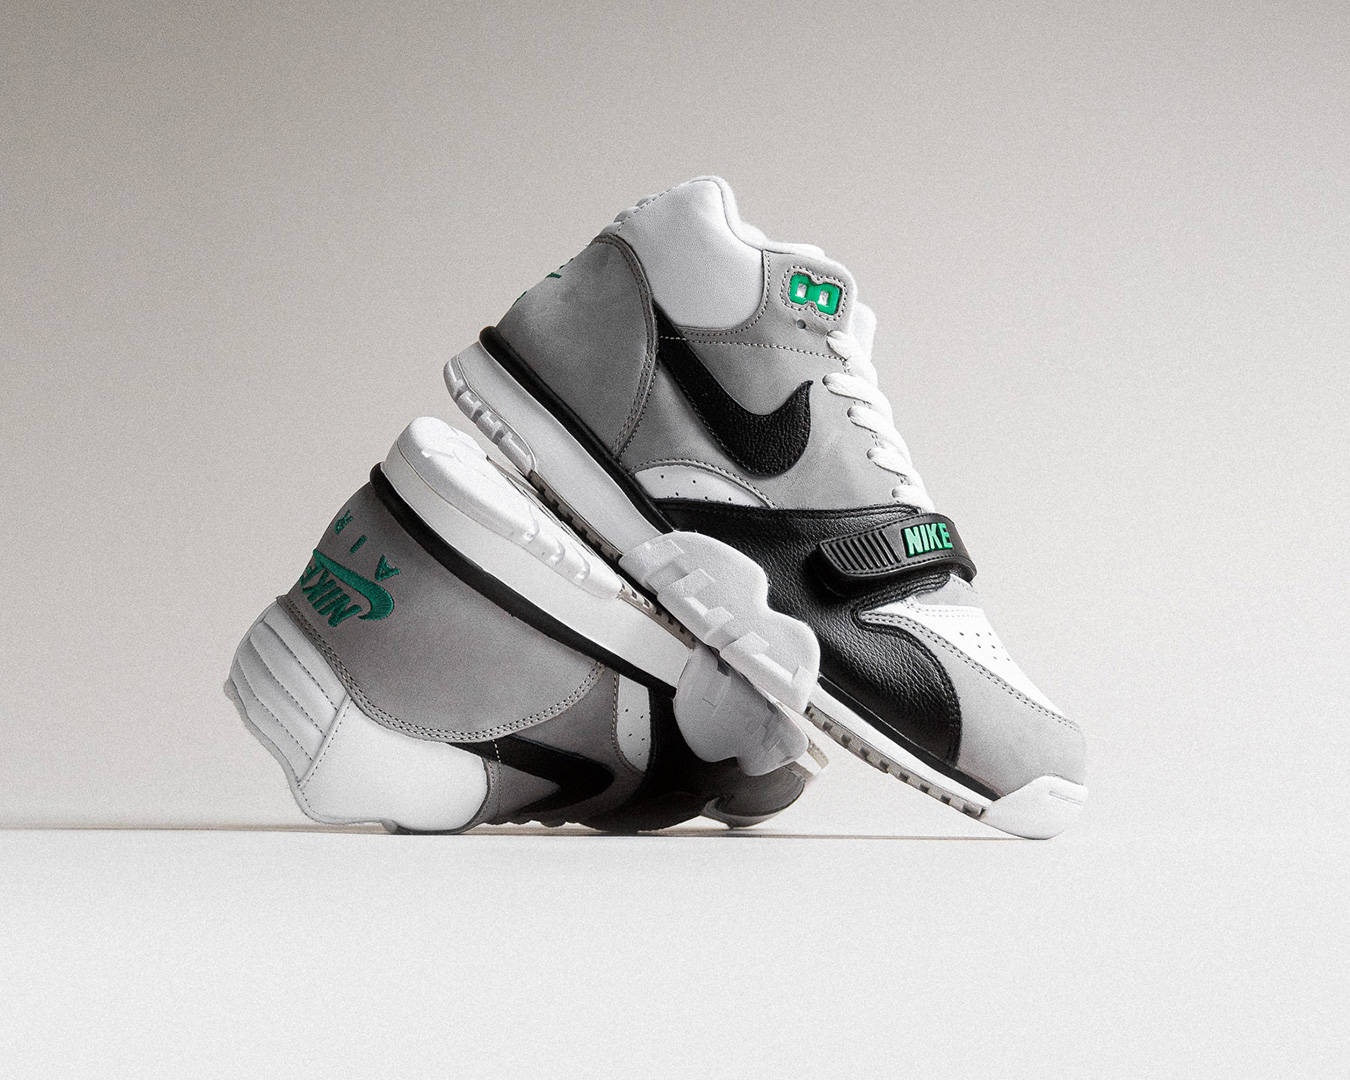 Armada Aventurero Detector An icon for 35 years - Nike puts the Air Trainer 1 in the spotlight -  OVERKILL Blog